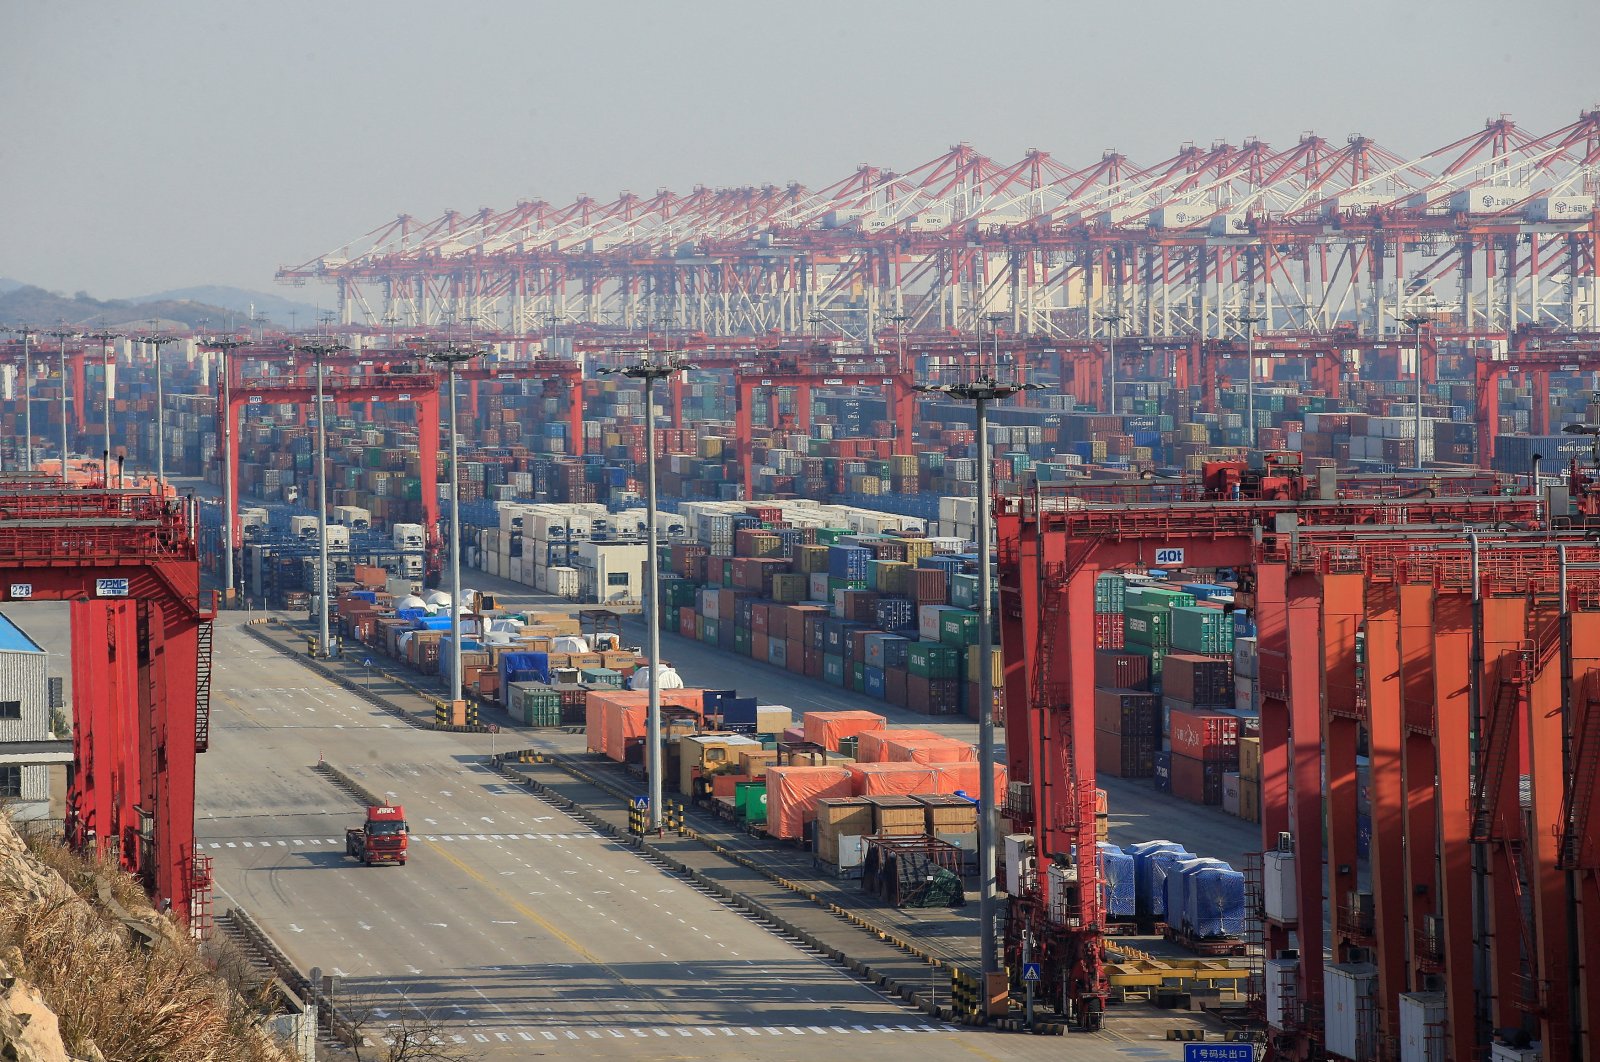 Containers are seen at the Yangshan Deep Water Port, part of the Shanghai Free Trade Zone, in Shanghai, China, Feb. 13, 2017. (Reuters Photo)